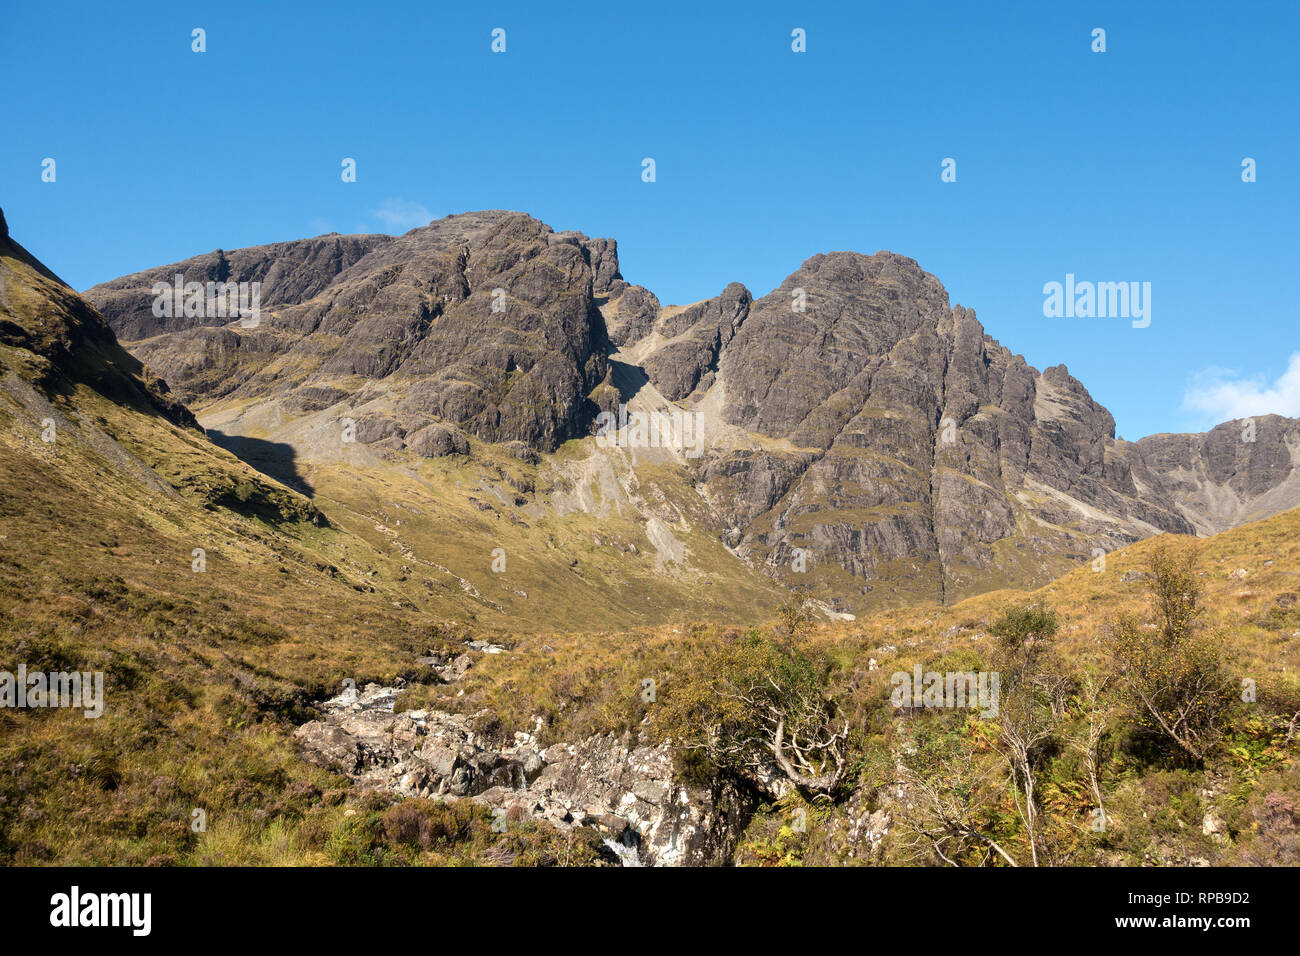 Bla Bheinn (left of centre) and Clach Glas (right of centre) in the Black Cuillin Mountains on the Isle of Skye, Scotland, UK Stock Photo